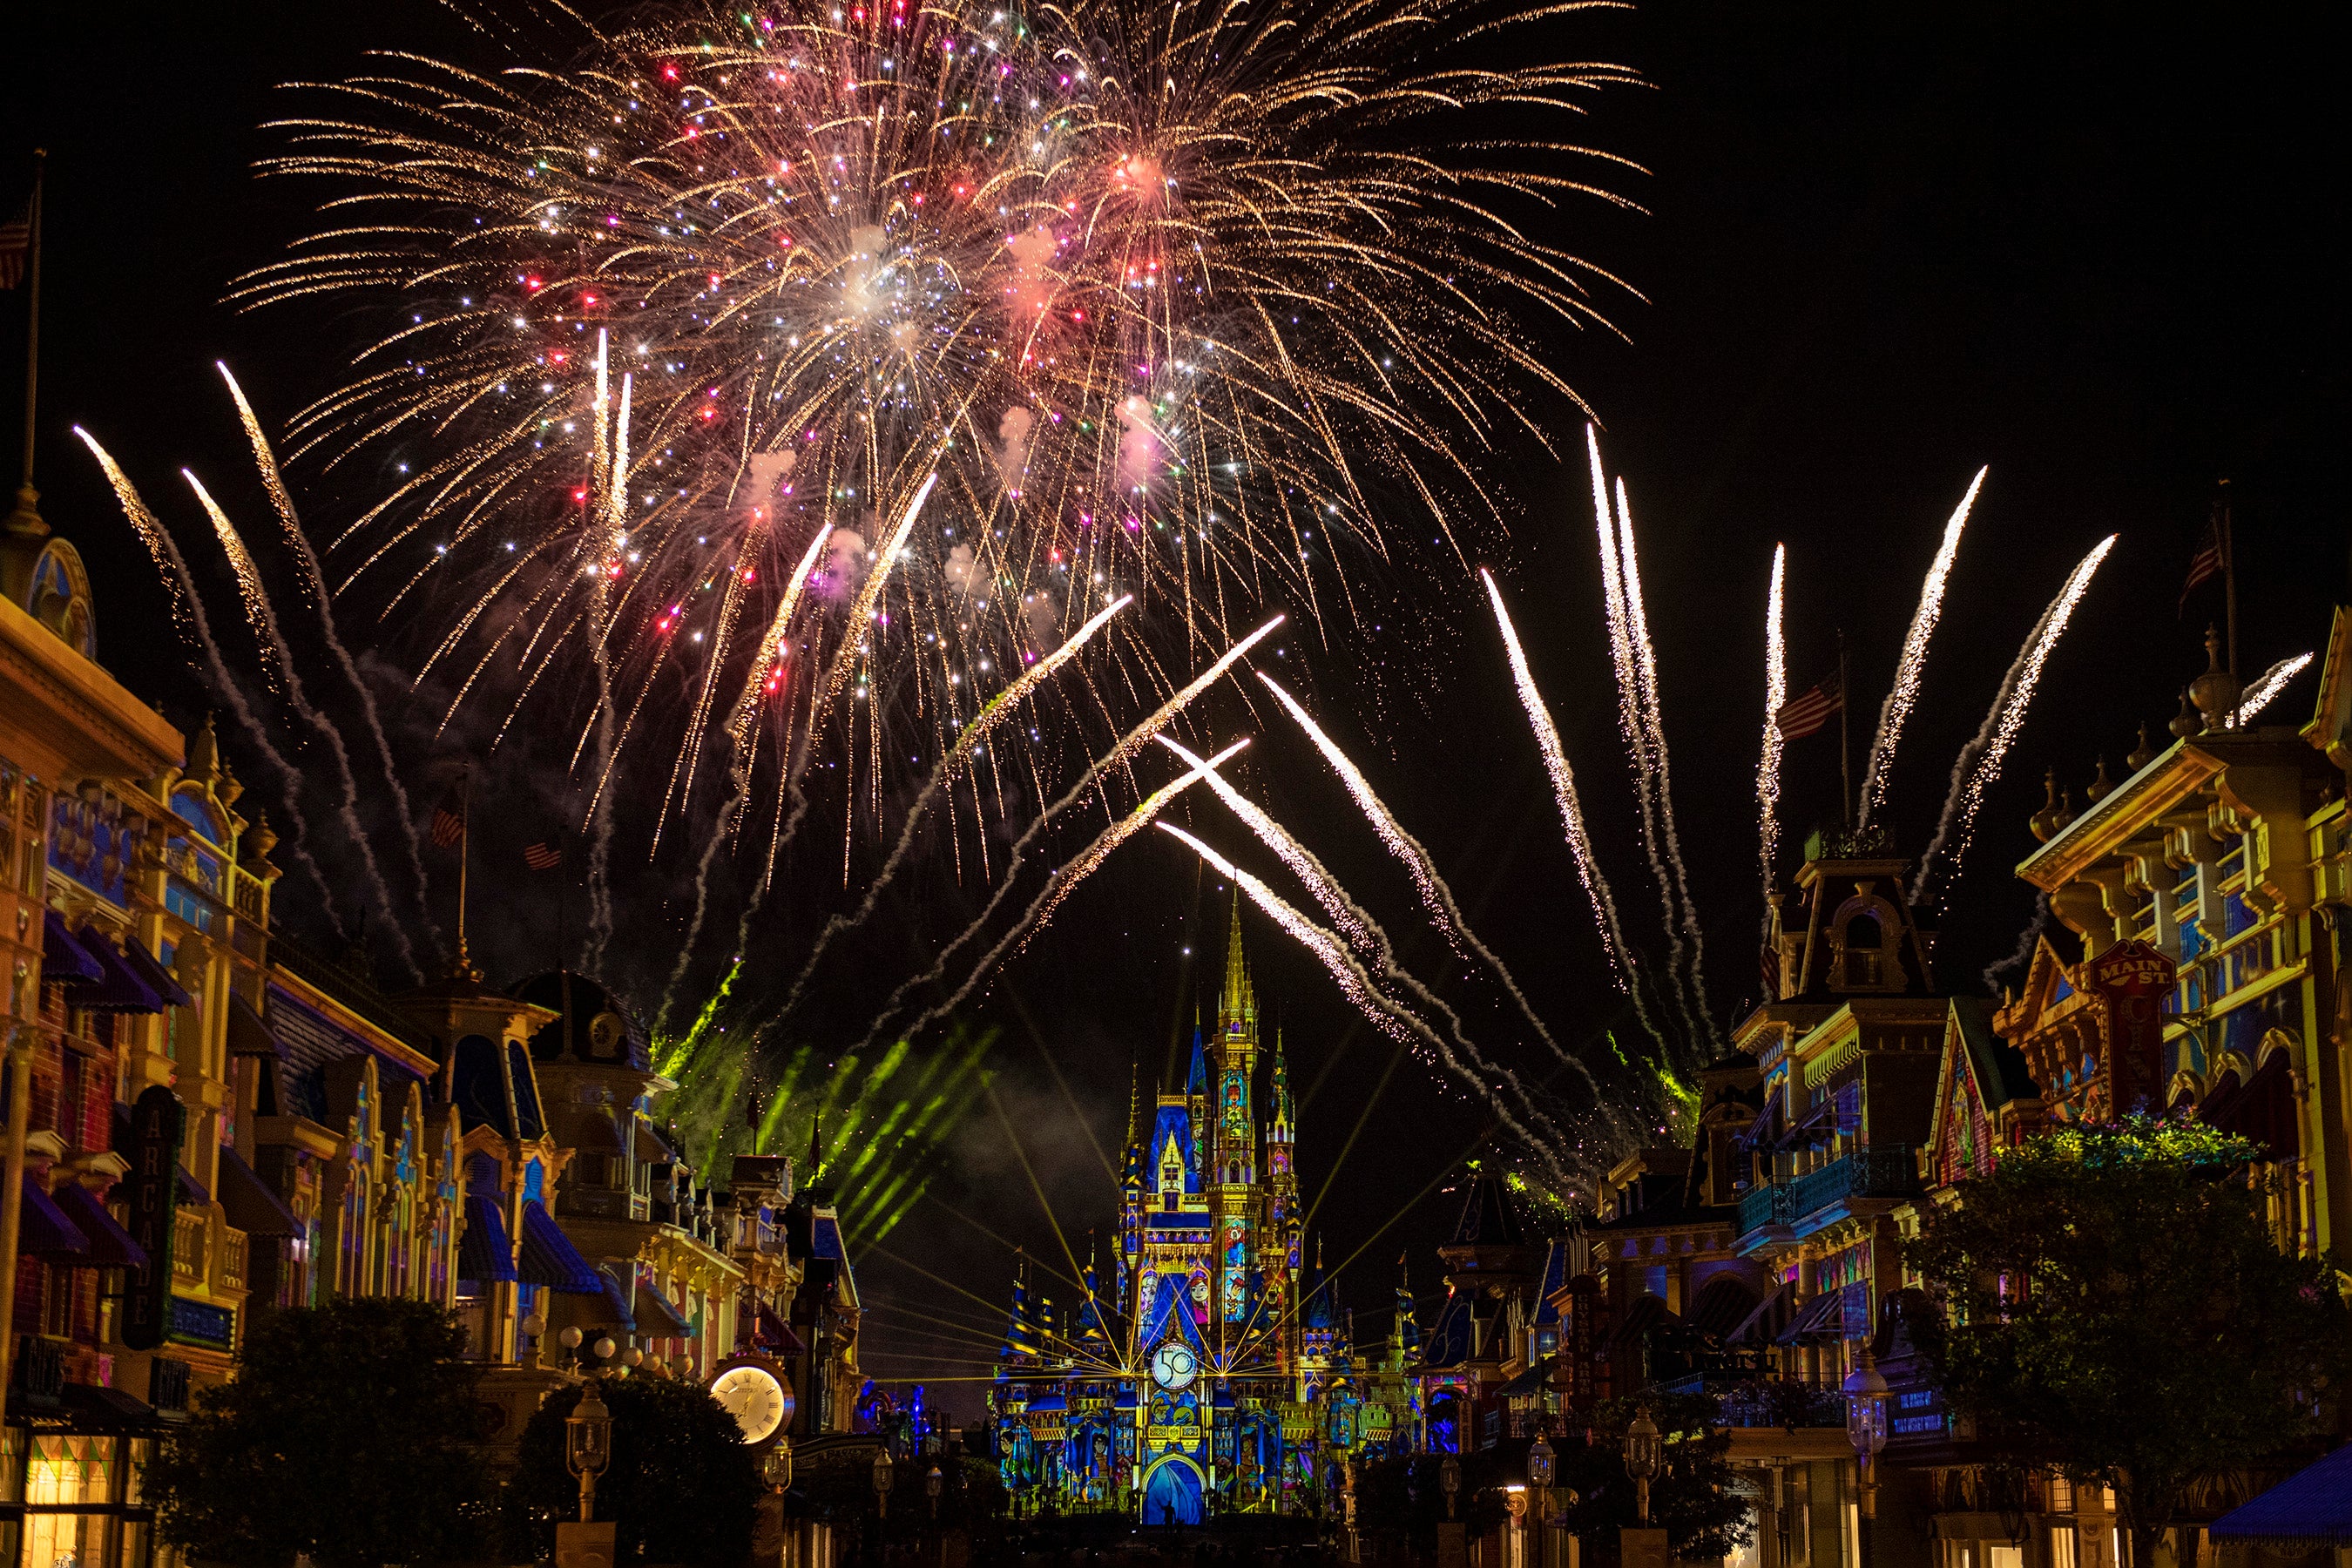 Don’t miss the Happily Ever After firework extravaganza on Main Street